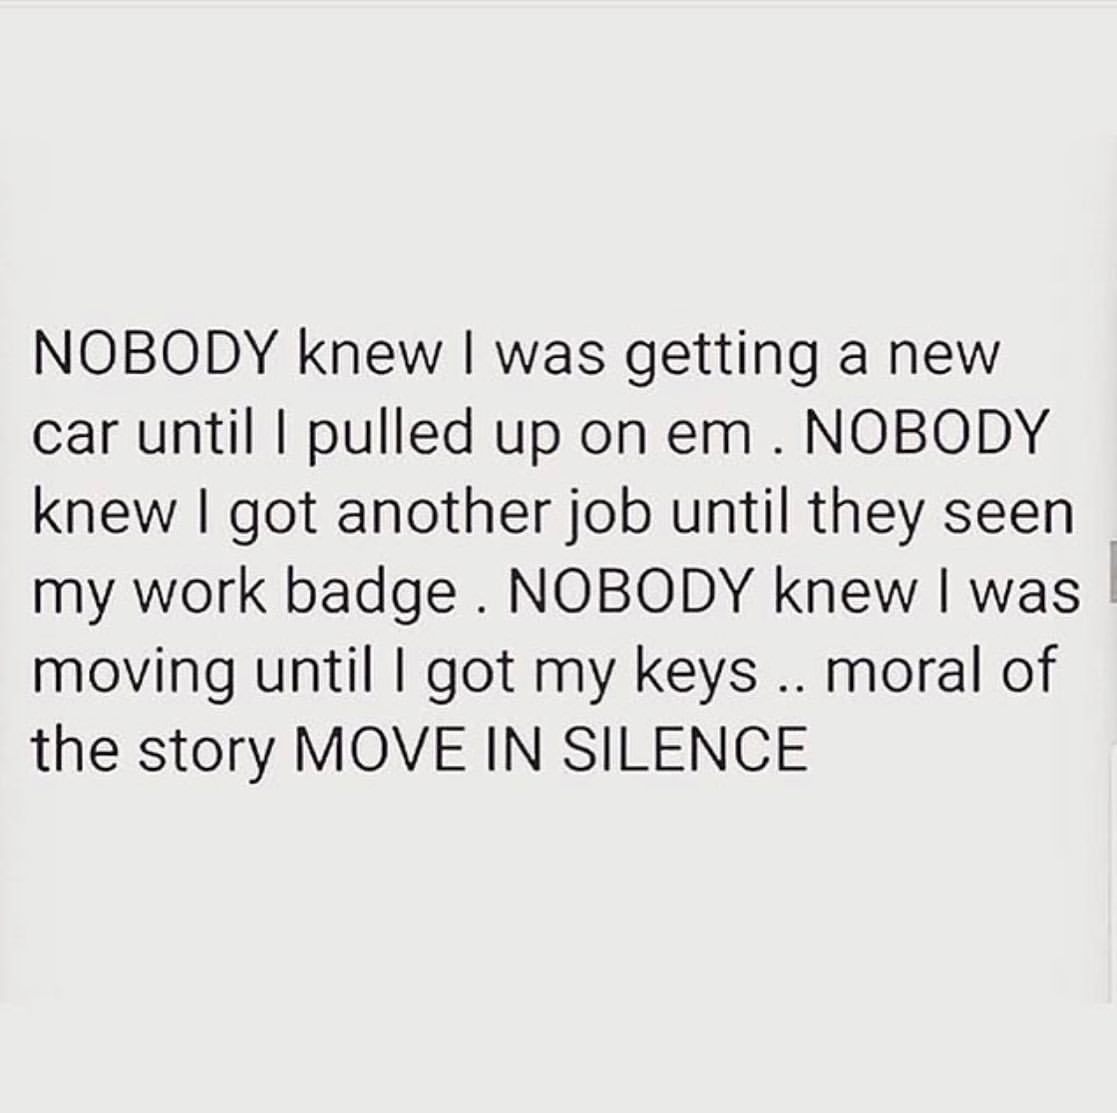 Nobody knew I was getting a new car until I pulled up on em. Nobody knew I got another job until they seen my work badge. Nobody knew I was moving until I got my keys... moral of the story move in silence.